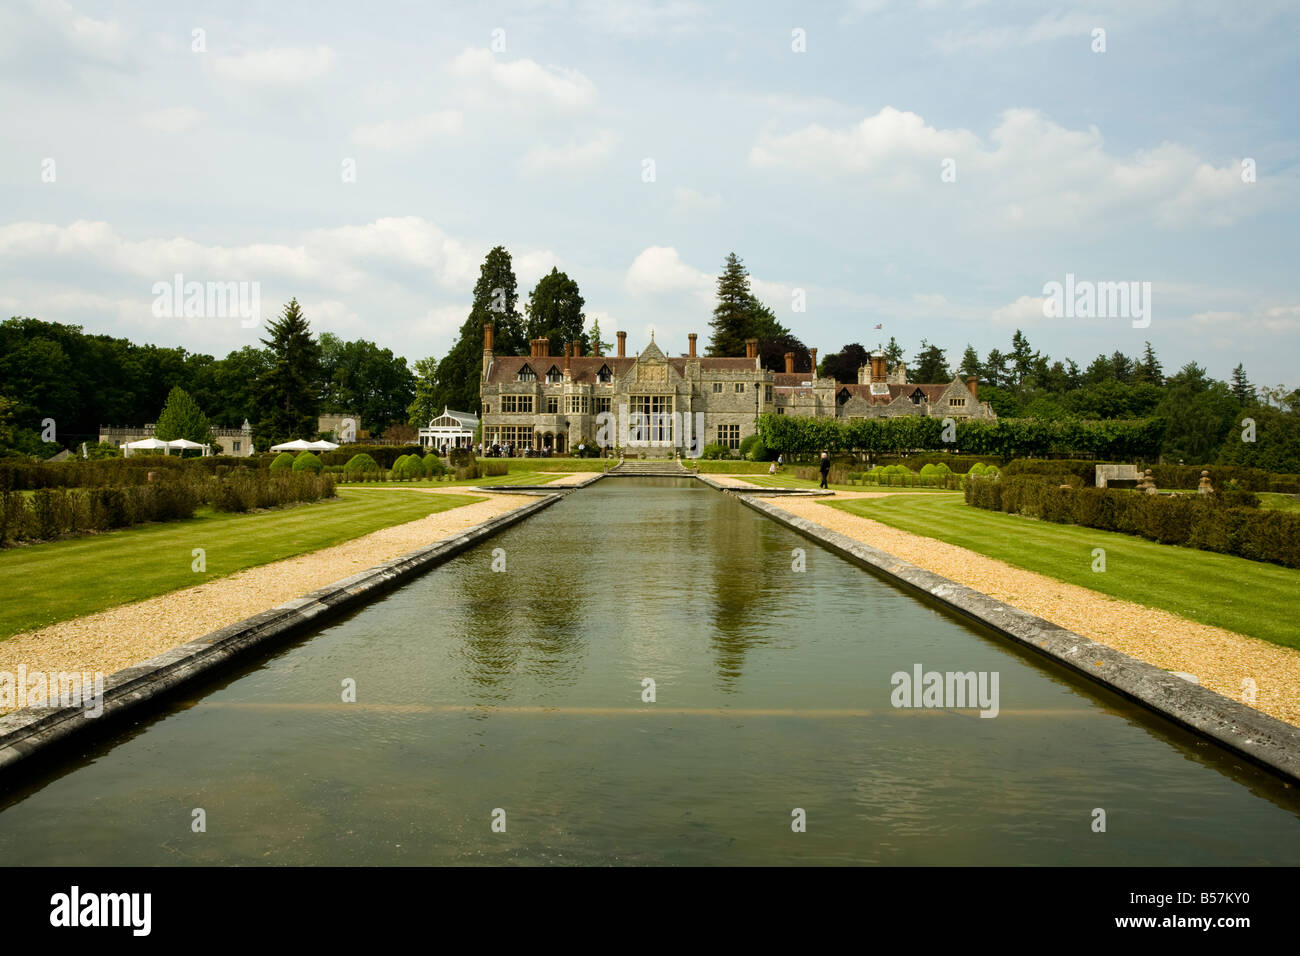 A man-made lake and water feature behind a original English Tudor country house. Stock Photo